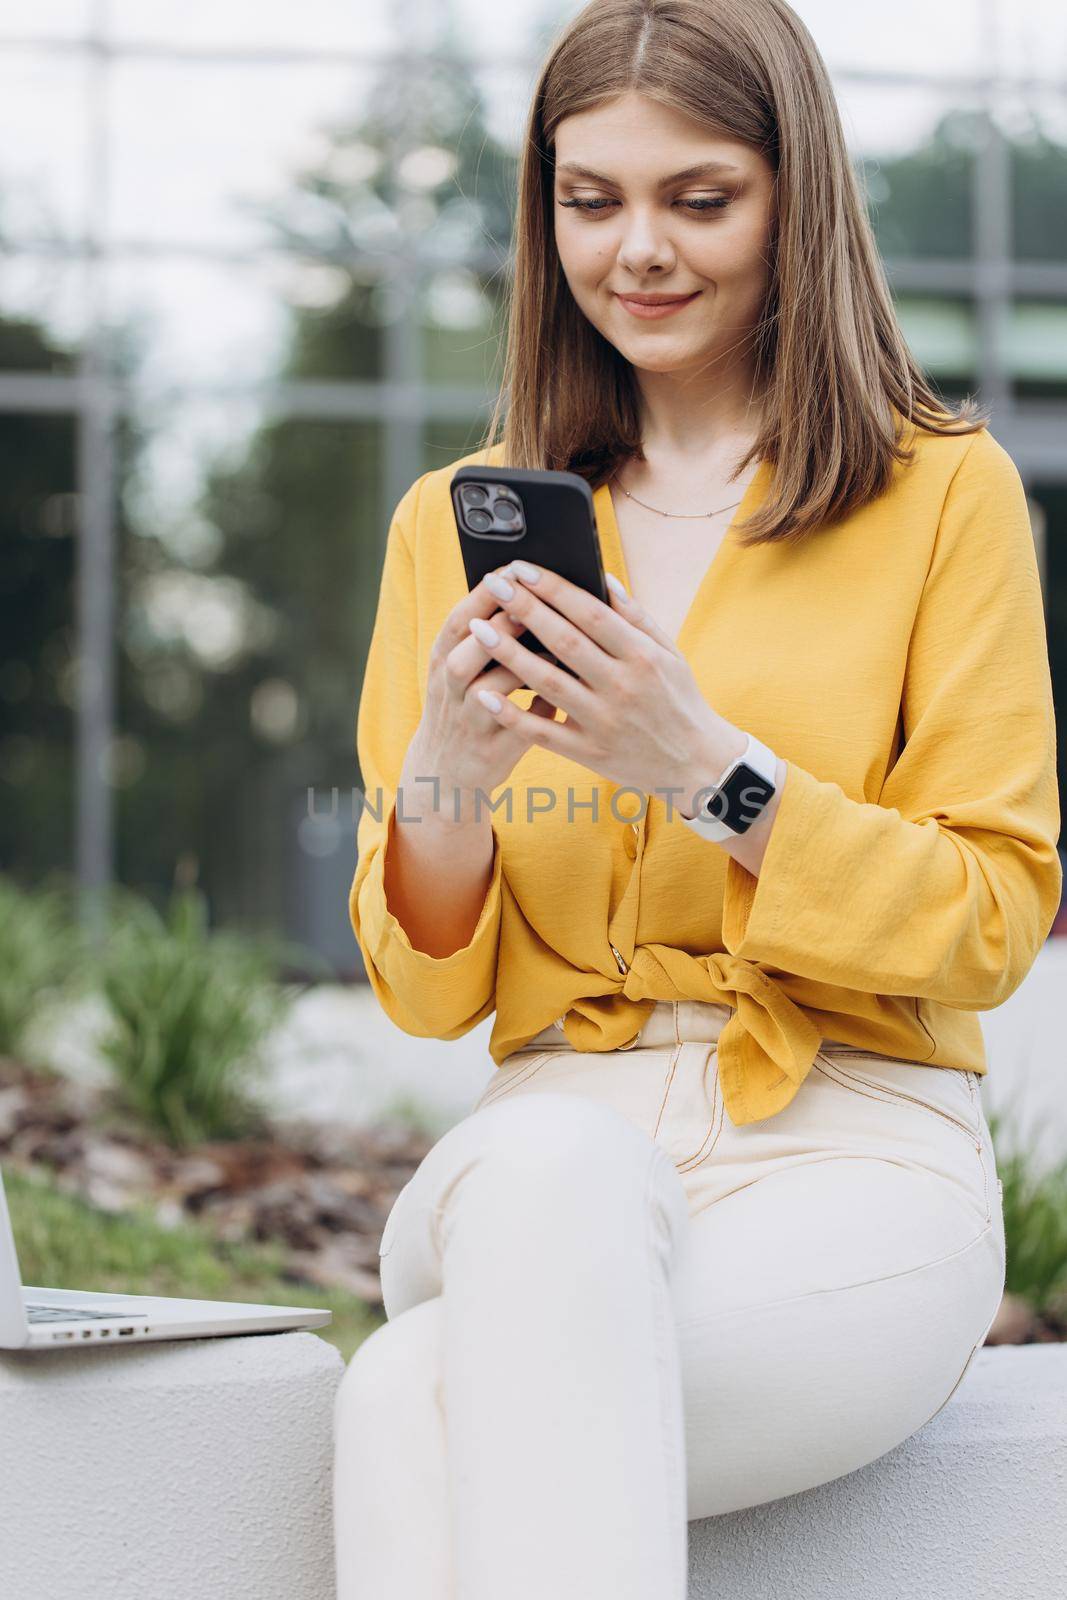 Appealing young elegant caucasian woman using social media application on smartphone text messages receive news smiling outdoor. People portraits and technology concept by uflypro